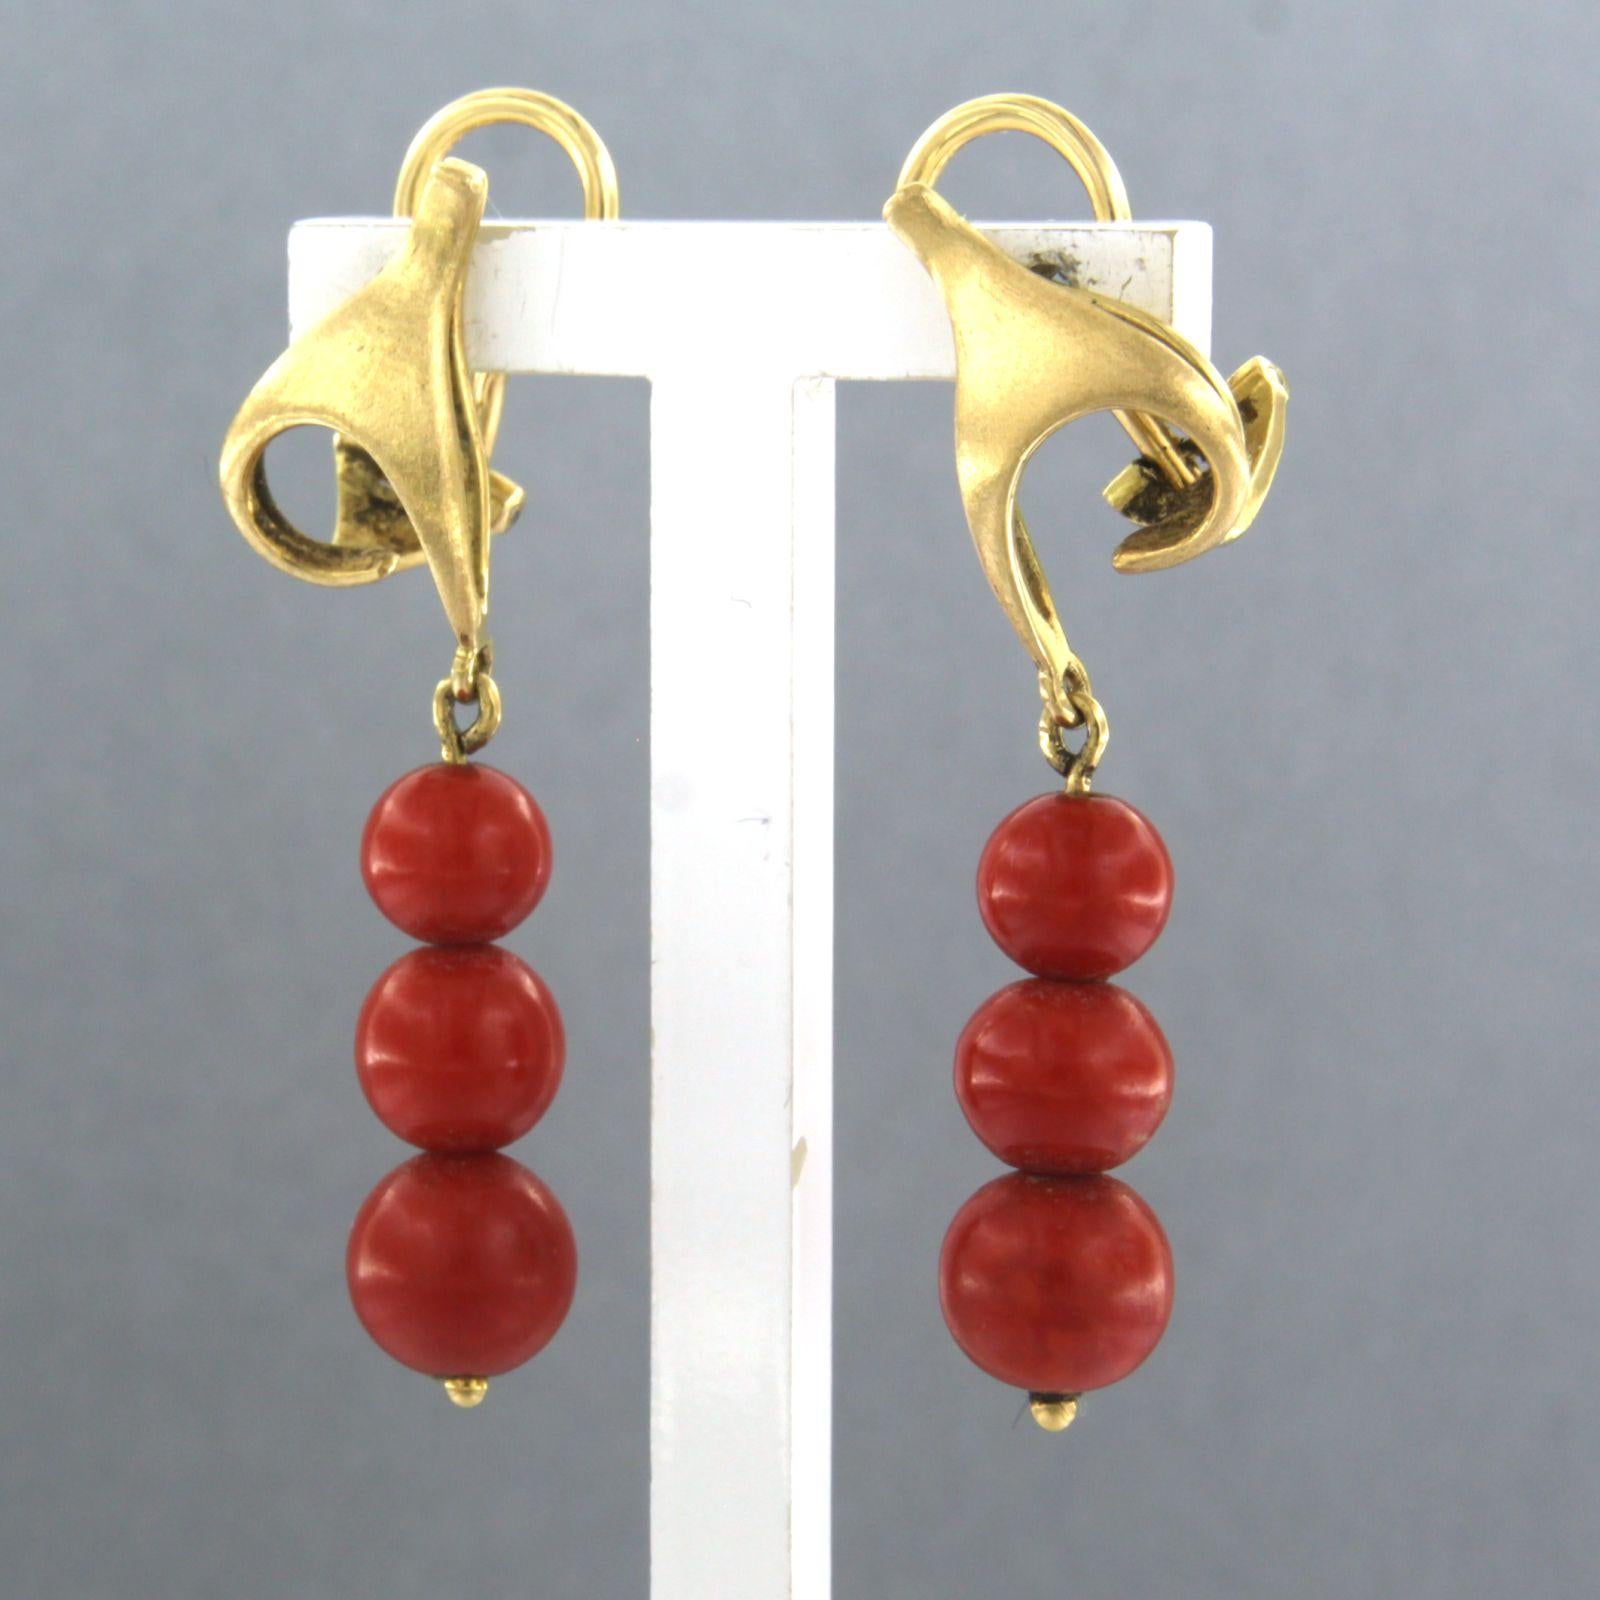 18 kt yellow gold earrings set with coral

Detailed description:

The earrings are 4.0 cm high and 9.0 mm wide

Total weight 7.2 grams

Seated with

- 6 x 6.0 mm - 7.5 mm round bead cut coral

color red
purity : n/a
Gemstones are often treated to